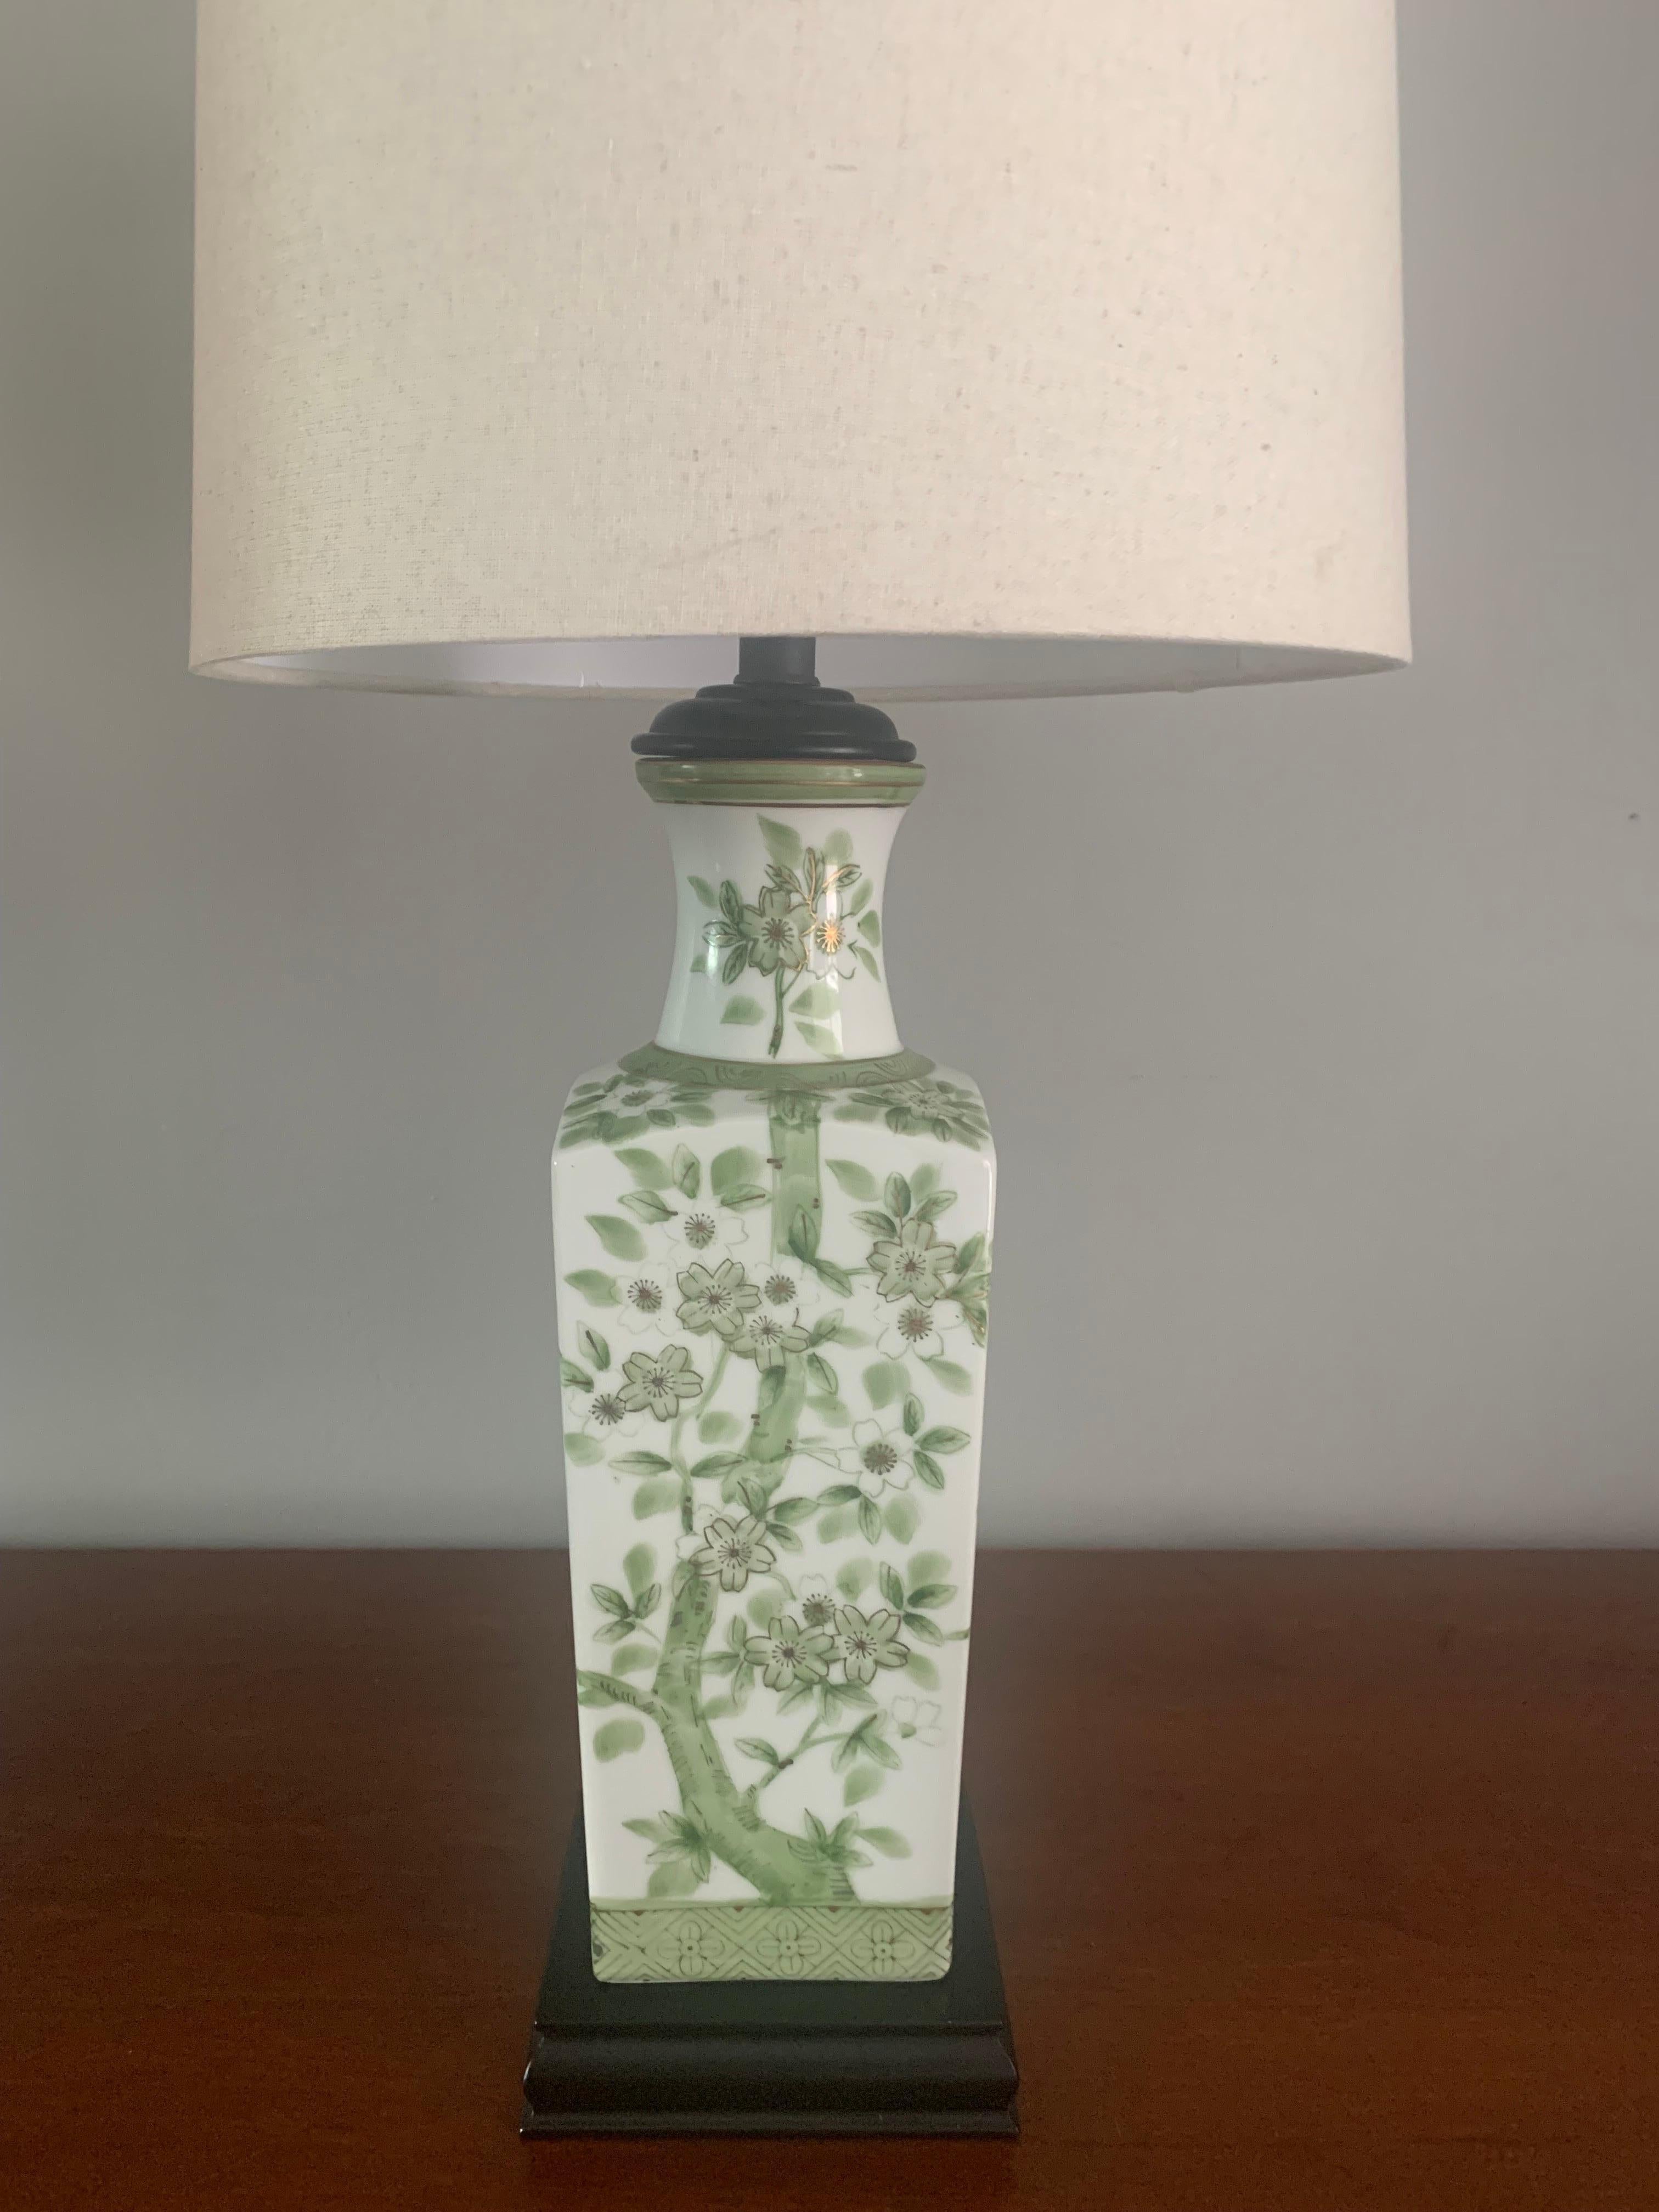 Pair of elegant porcelain lamps from Japan. Circa 1940s - 1950s. A glossy white vase. Adorned by images of cherry blossoms on all sides. Hand painted with various tones of green and gold. 

Black wooden base. 

Sold with out shades. 